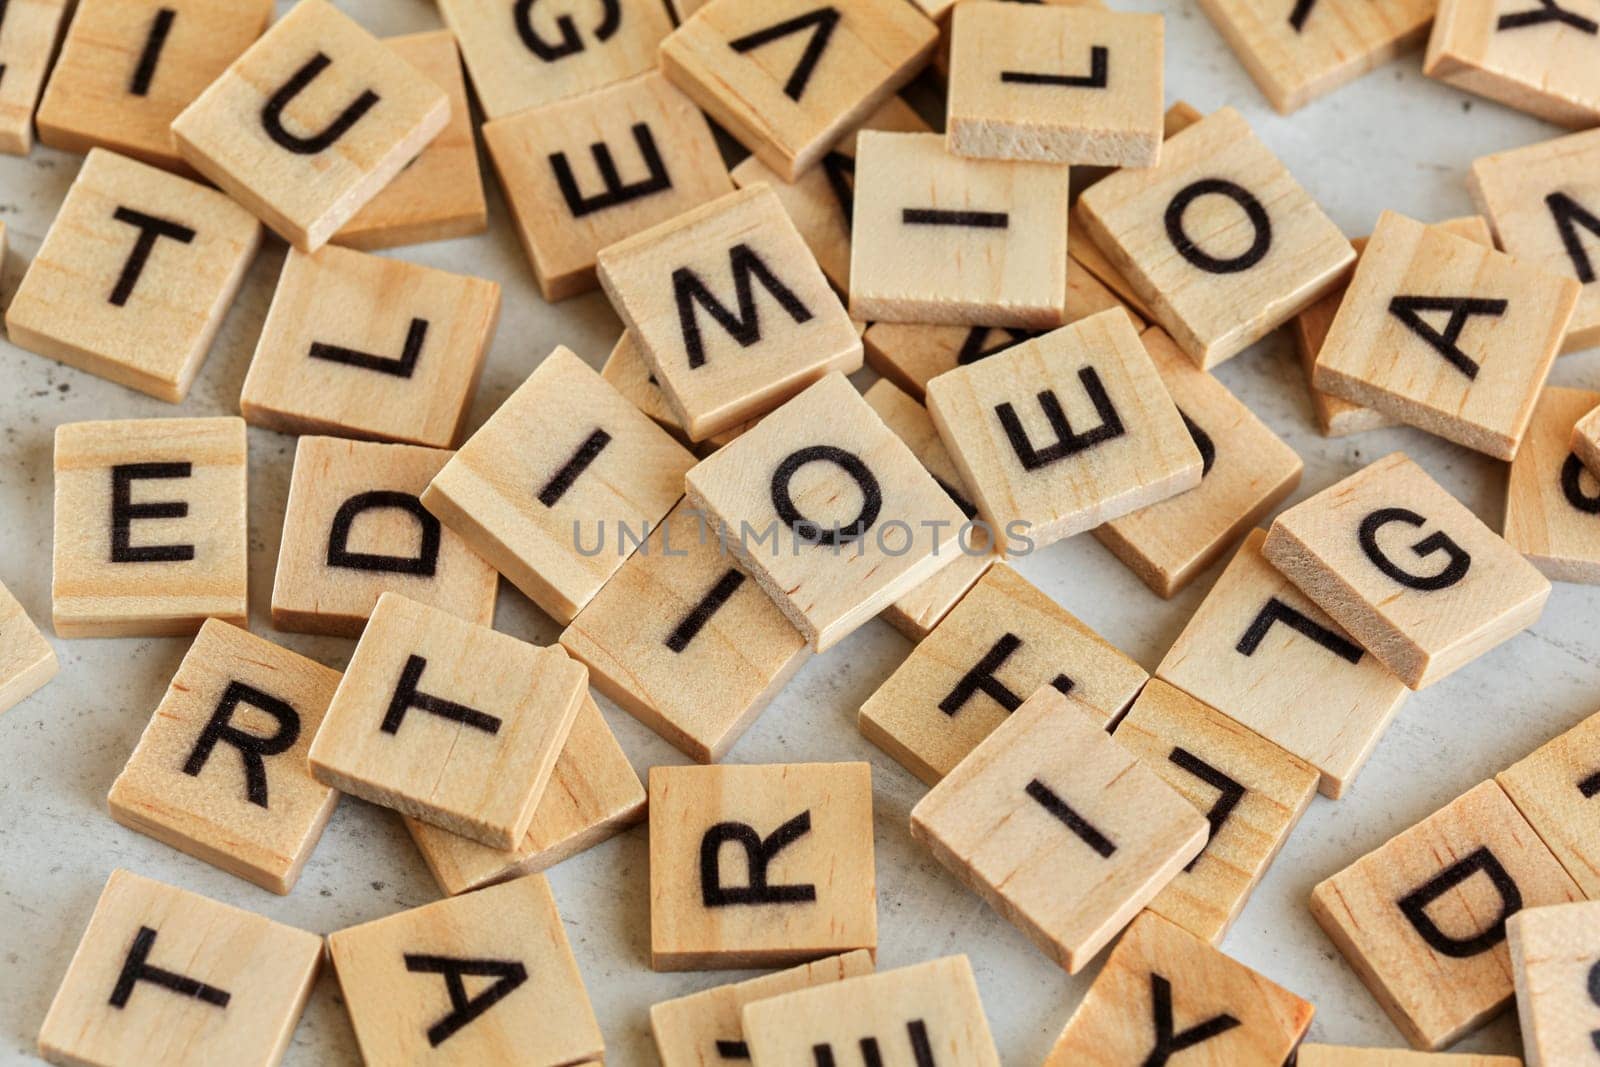 Pile of wooden tiles with various letters scattered on white stone like board, closeup view from above.